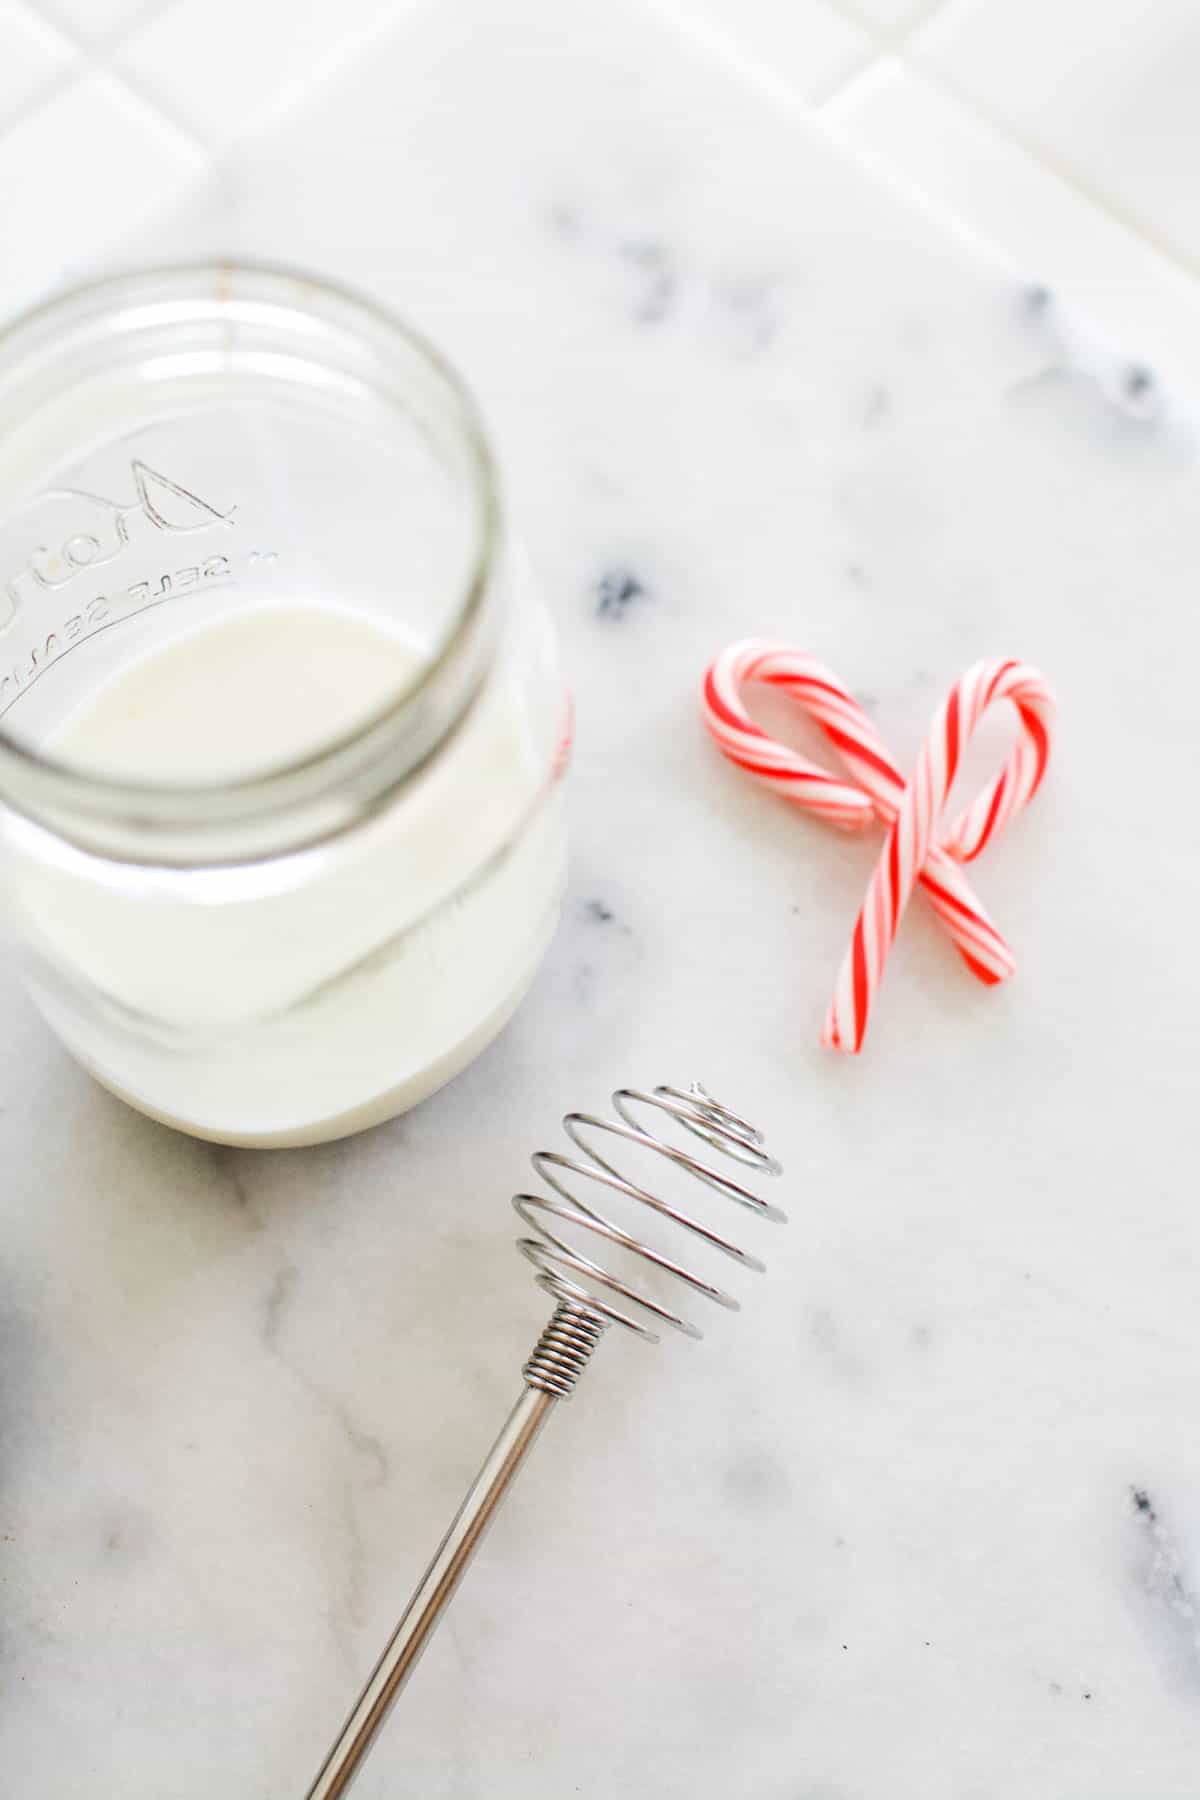 A jar of milk on the counter next to a small whisk and two mini candy canes.